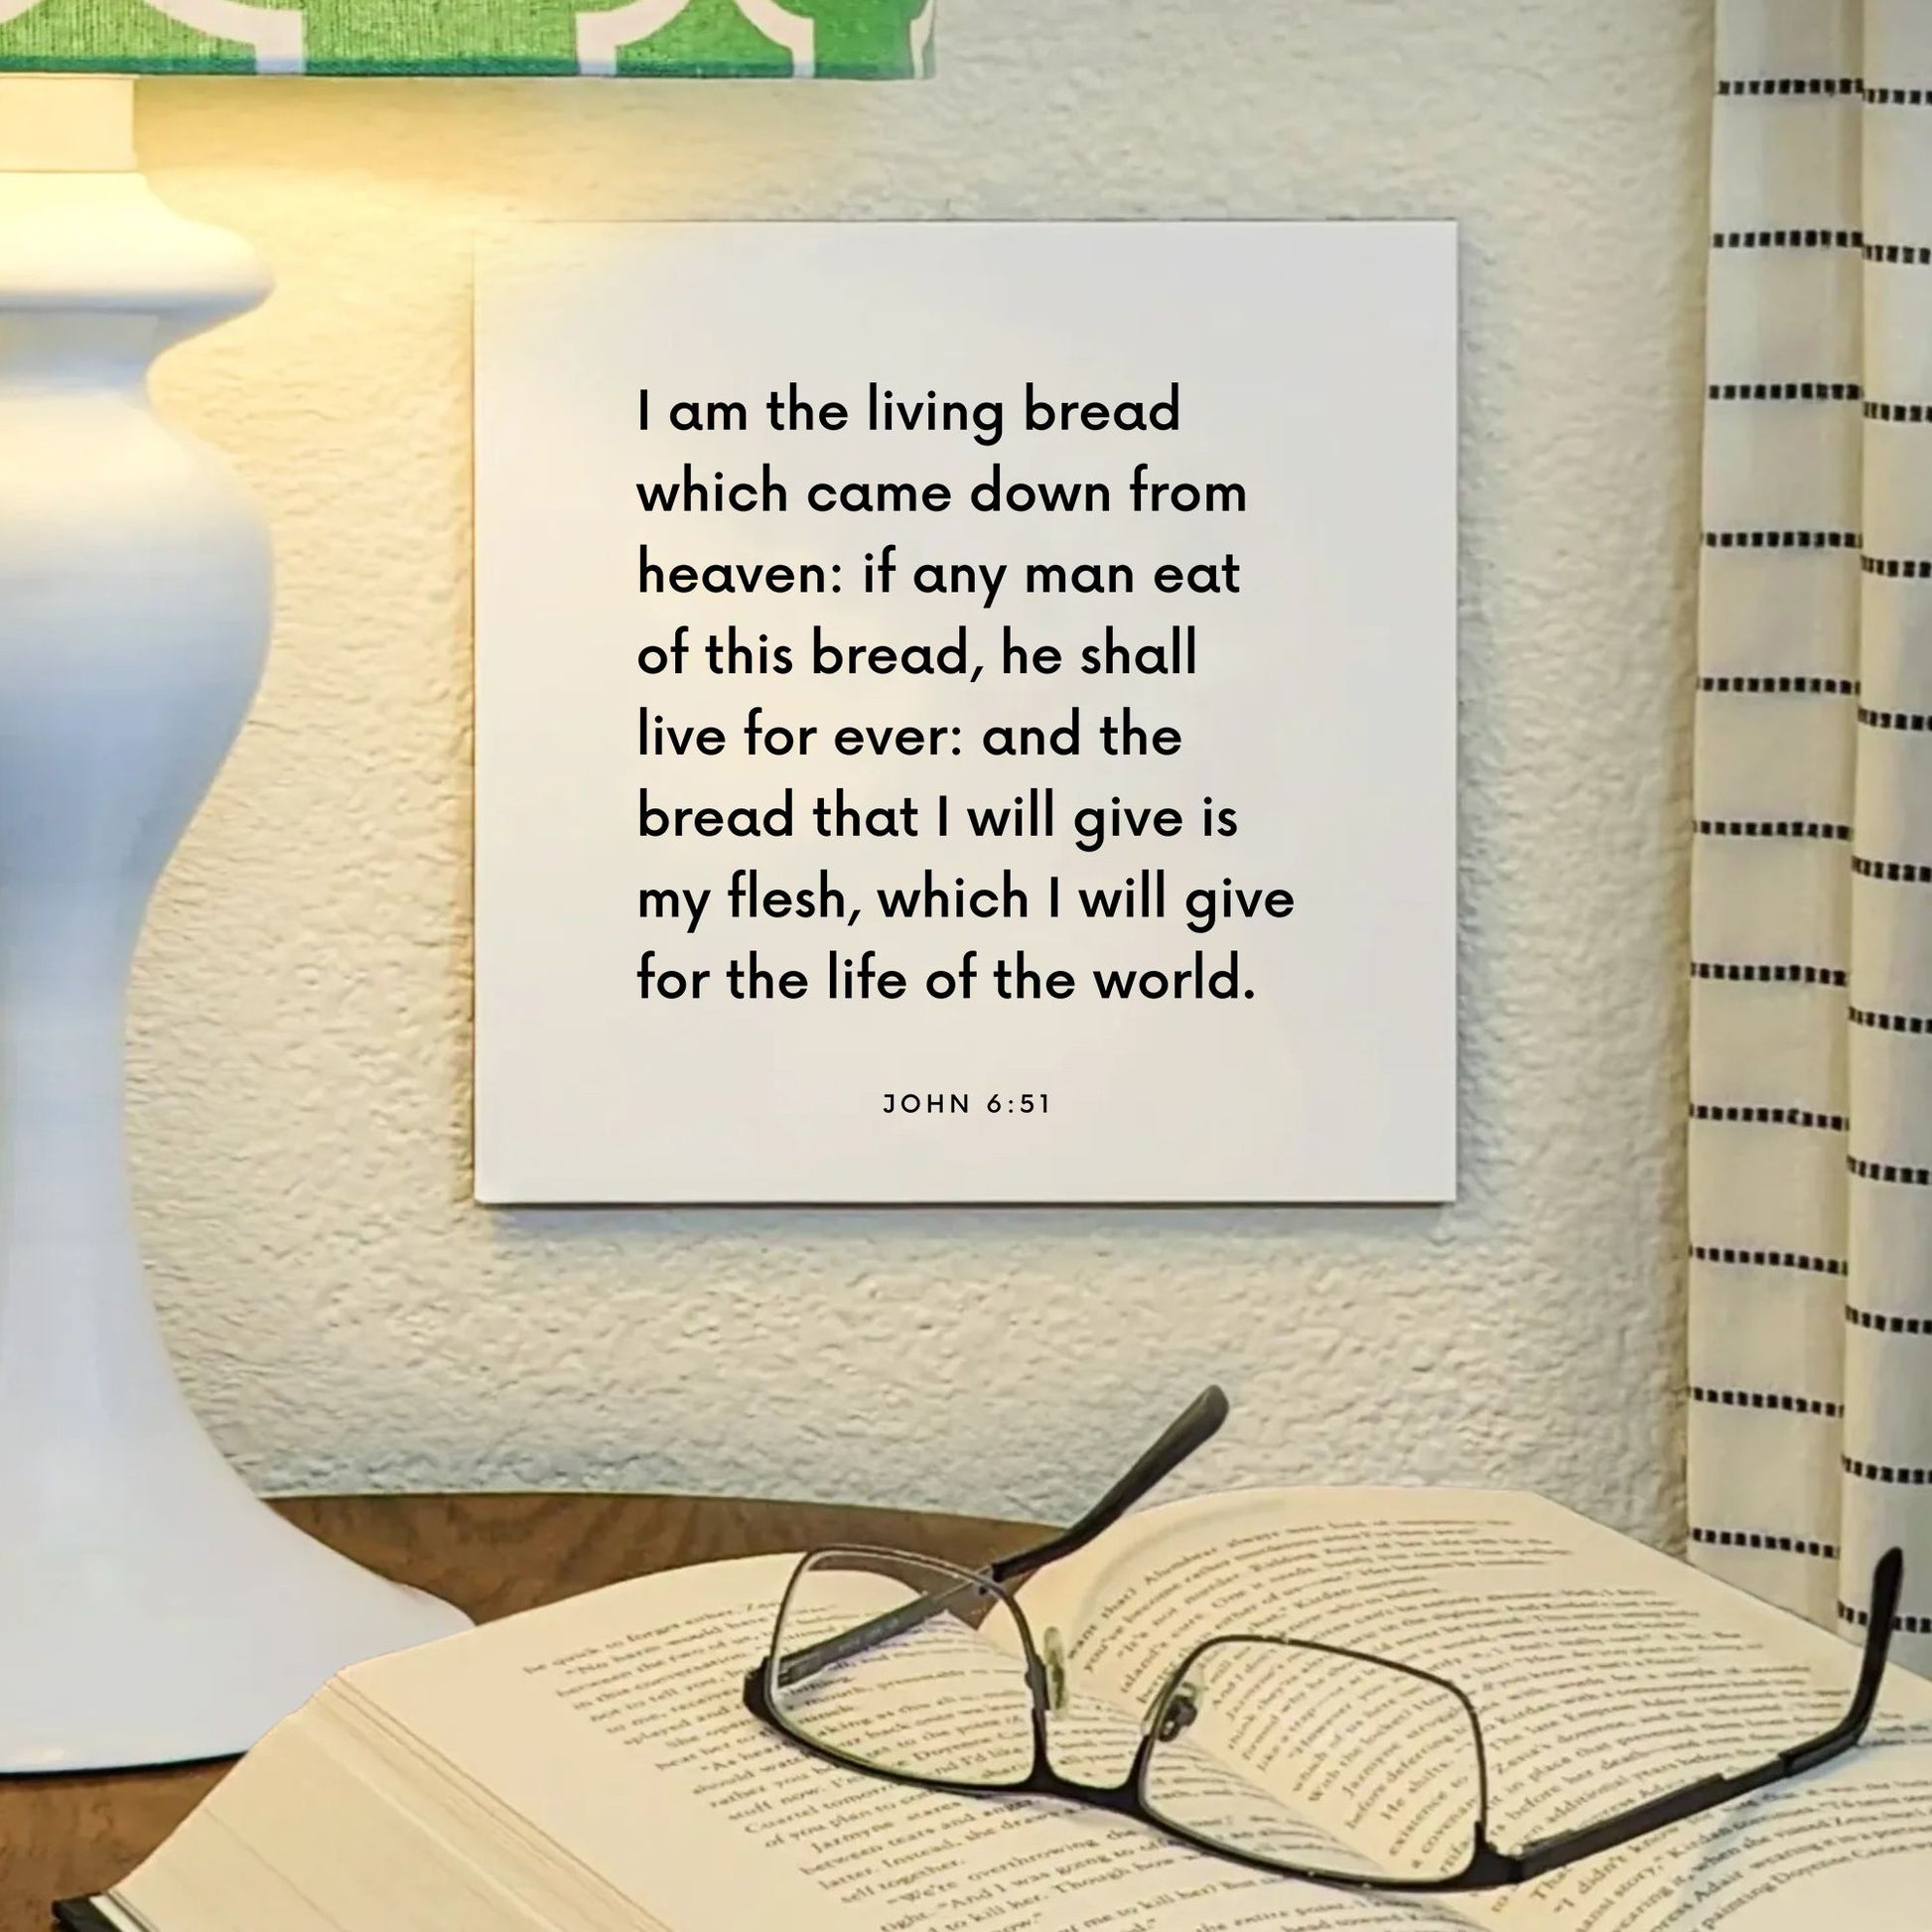 Lamp mouting of the scripture tile for John 6:51 - "The bread that I will give is my flesh"